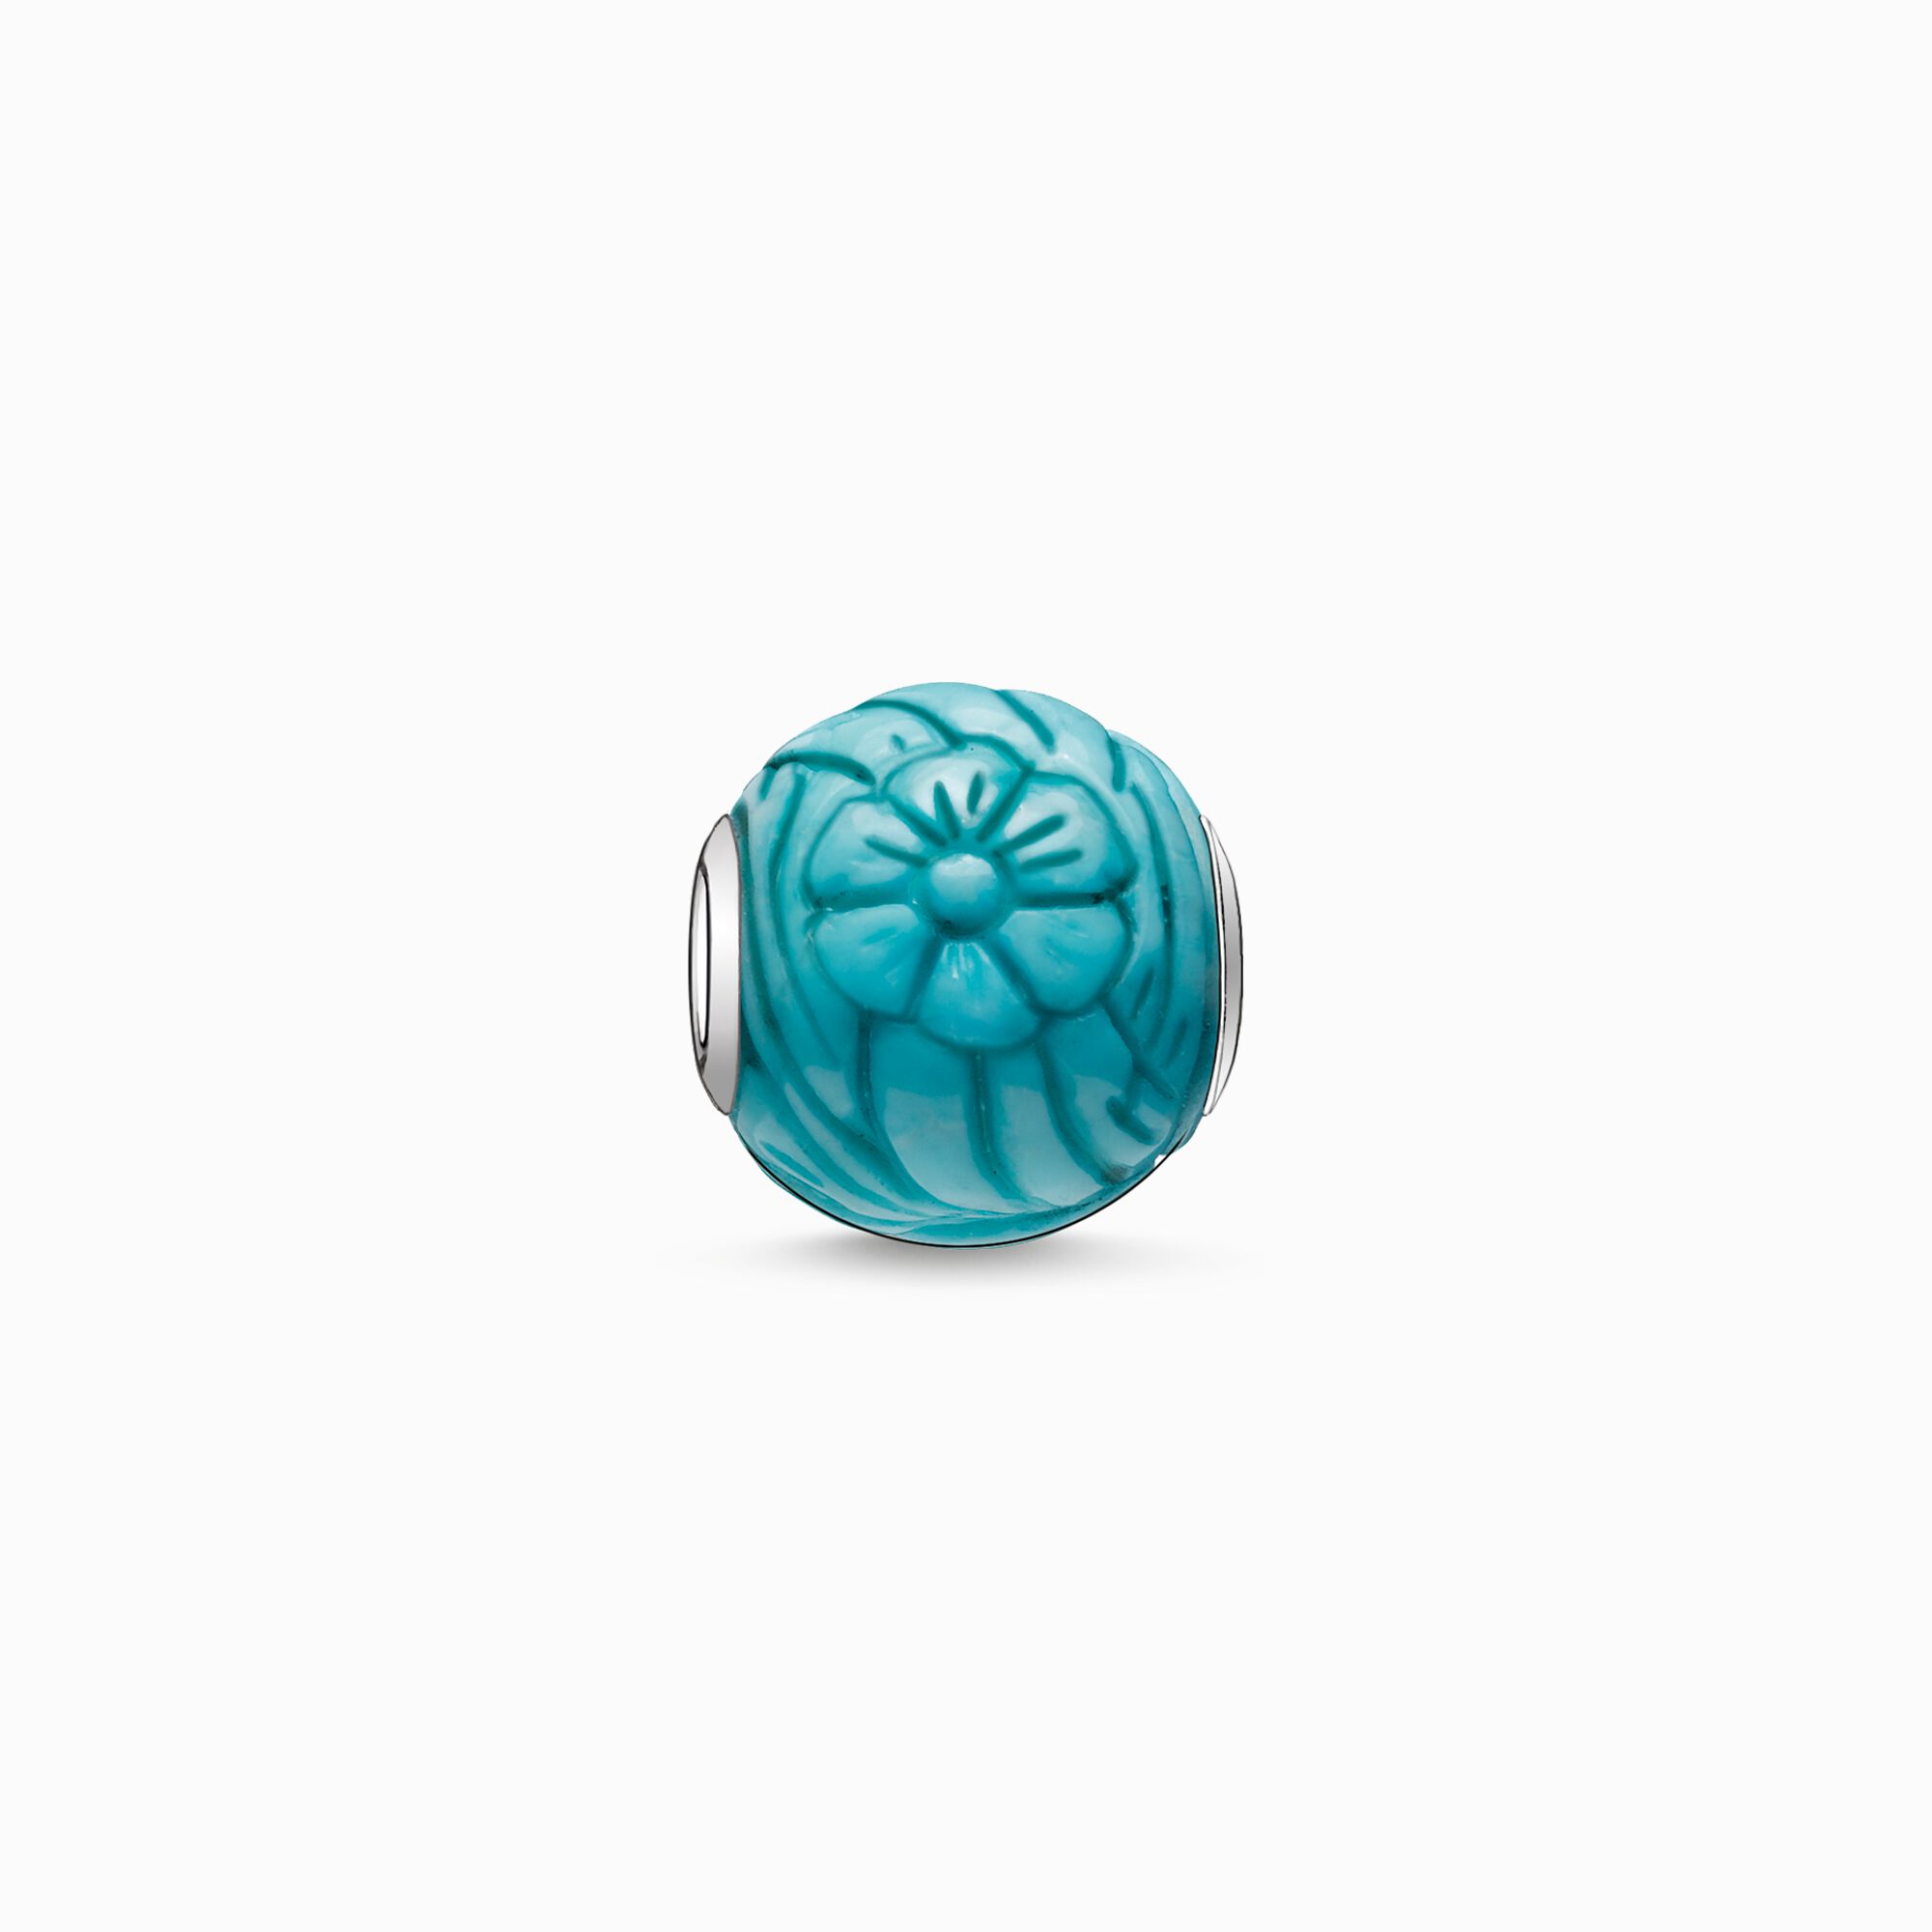 Bead summer flower from the Karma Beads collection in the THOMAS SABO online store